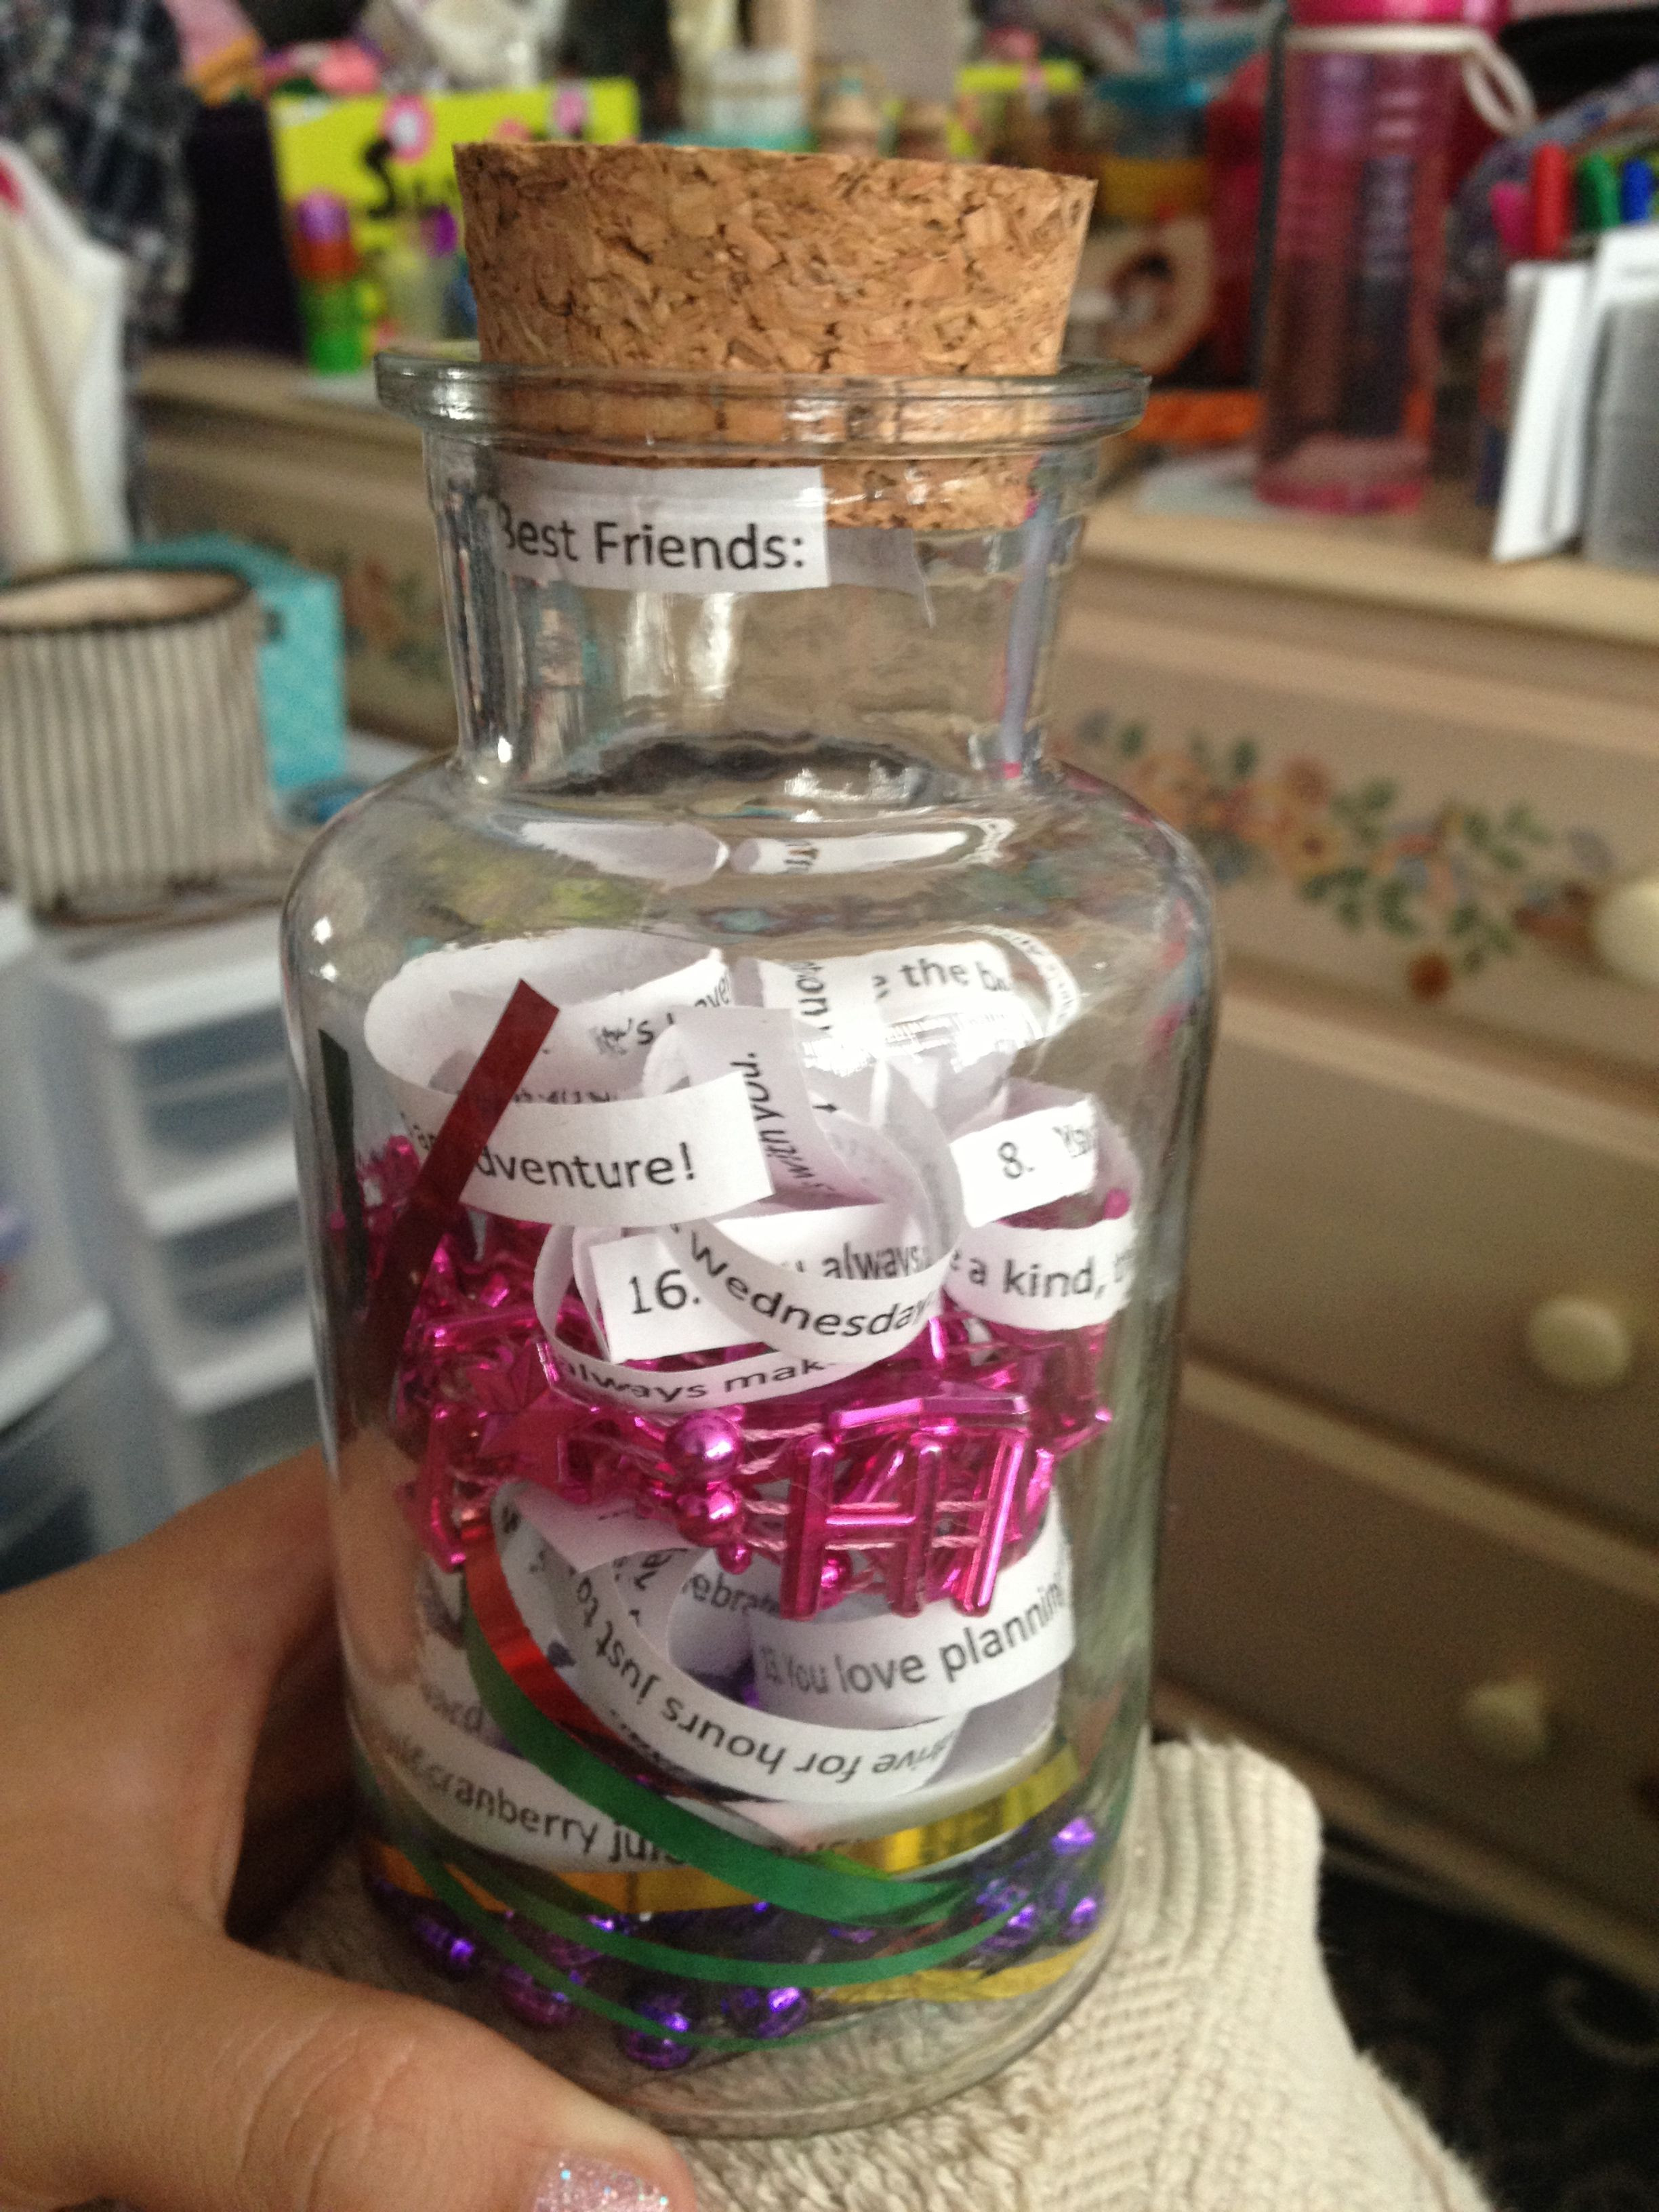 22Nd Birthday Gift Ideas
 22 reasons you re my best friend in a corked glass bottle